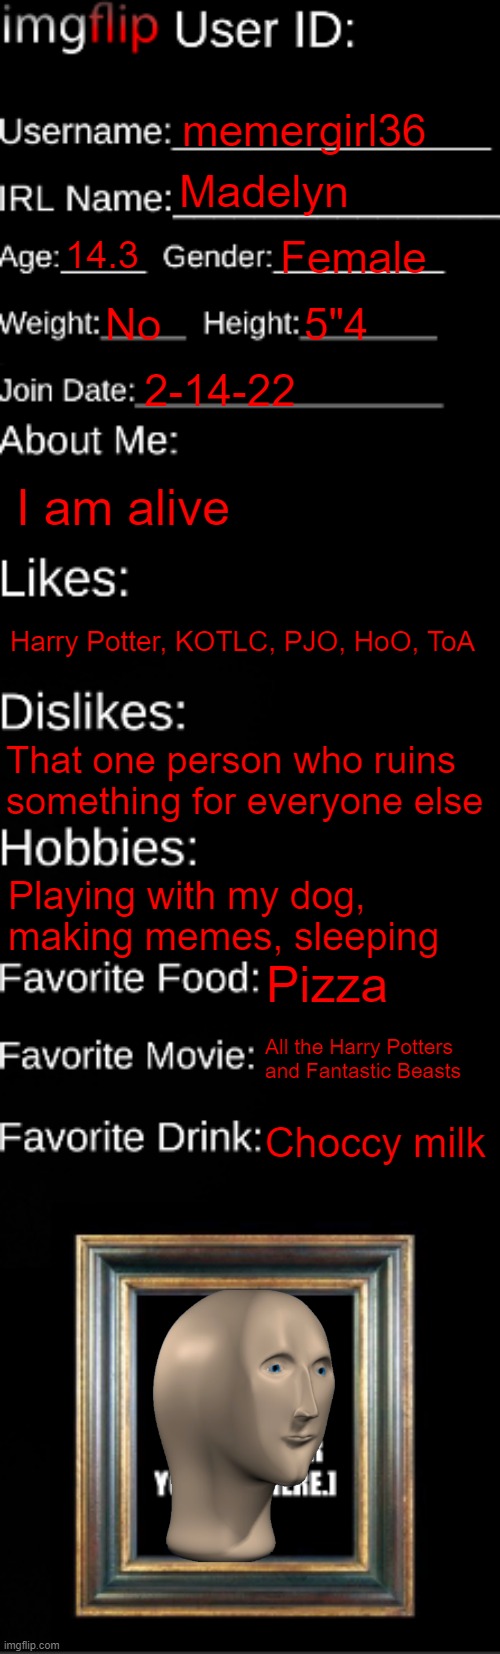 Because why not | memergirl36; Madelyn; 14.3; Female; No; 5"4; 2-14-22; I am alive; Harry Potter, KOTLC, PJO, HoO, ToA; That one person who ruins something for everyone else; Playing with my dog, making memes, sleeping; Pizza; All the Harry Potters and Fantastic Beasts; Choccy milk | image tagged in imgflip id card | made w/ Imgflip meme maker